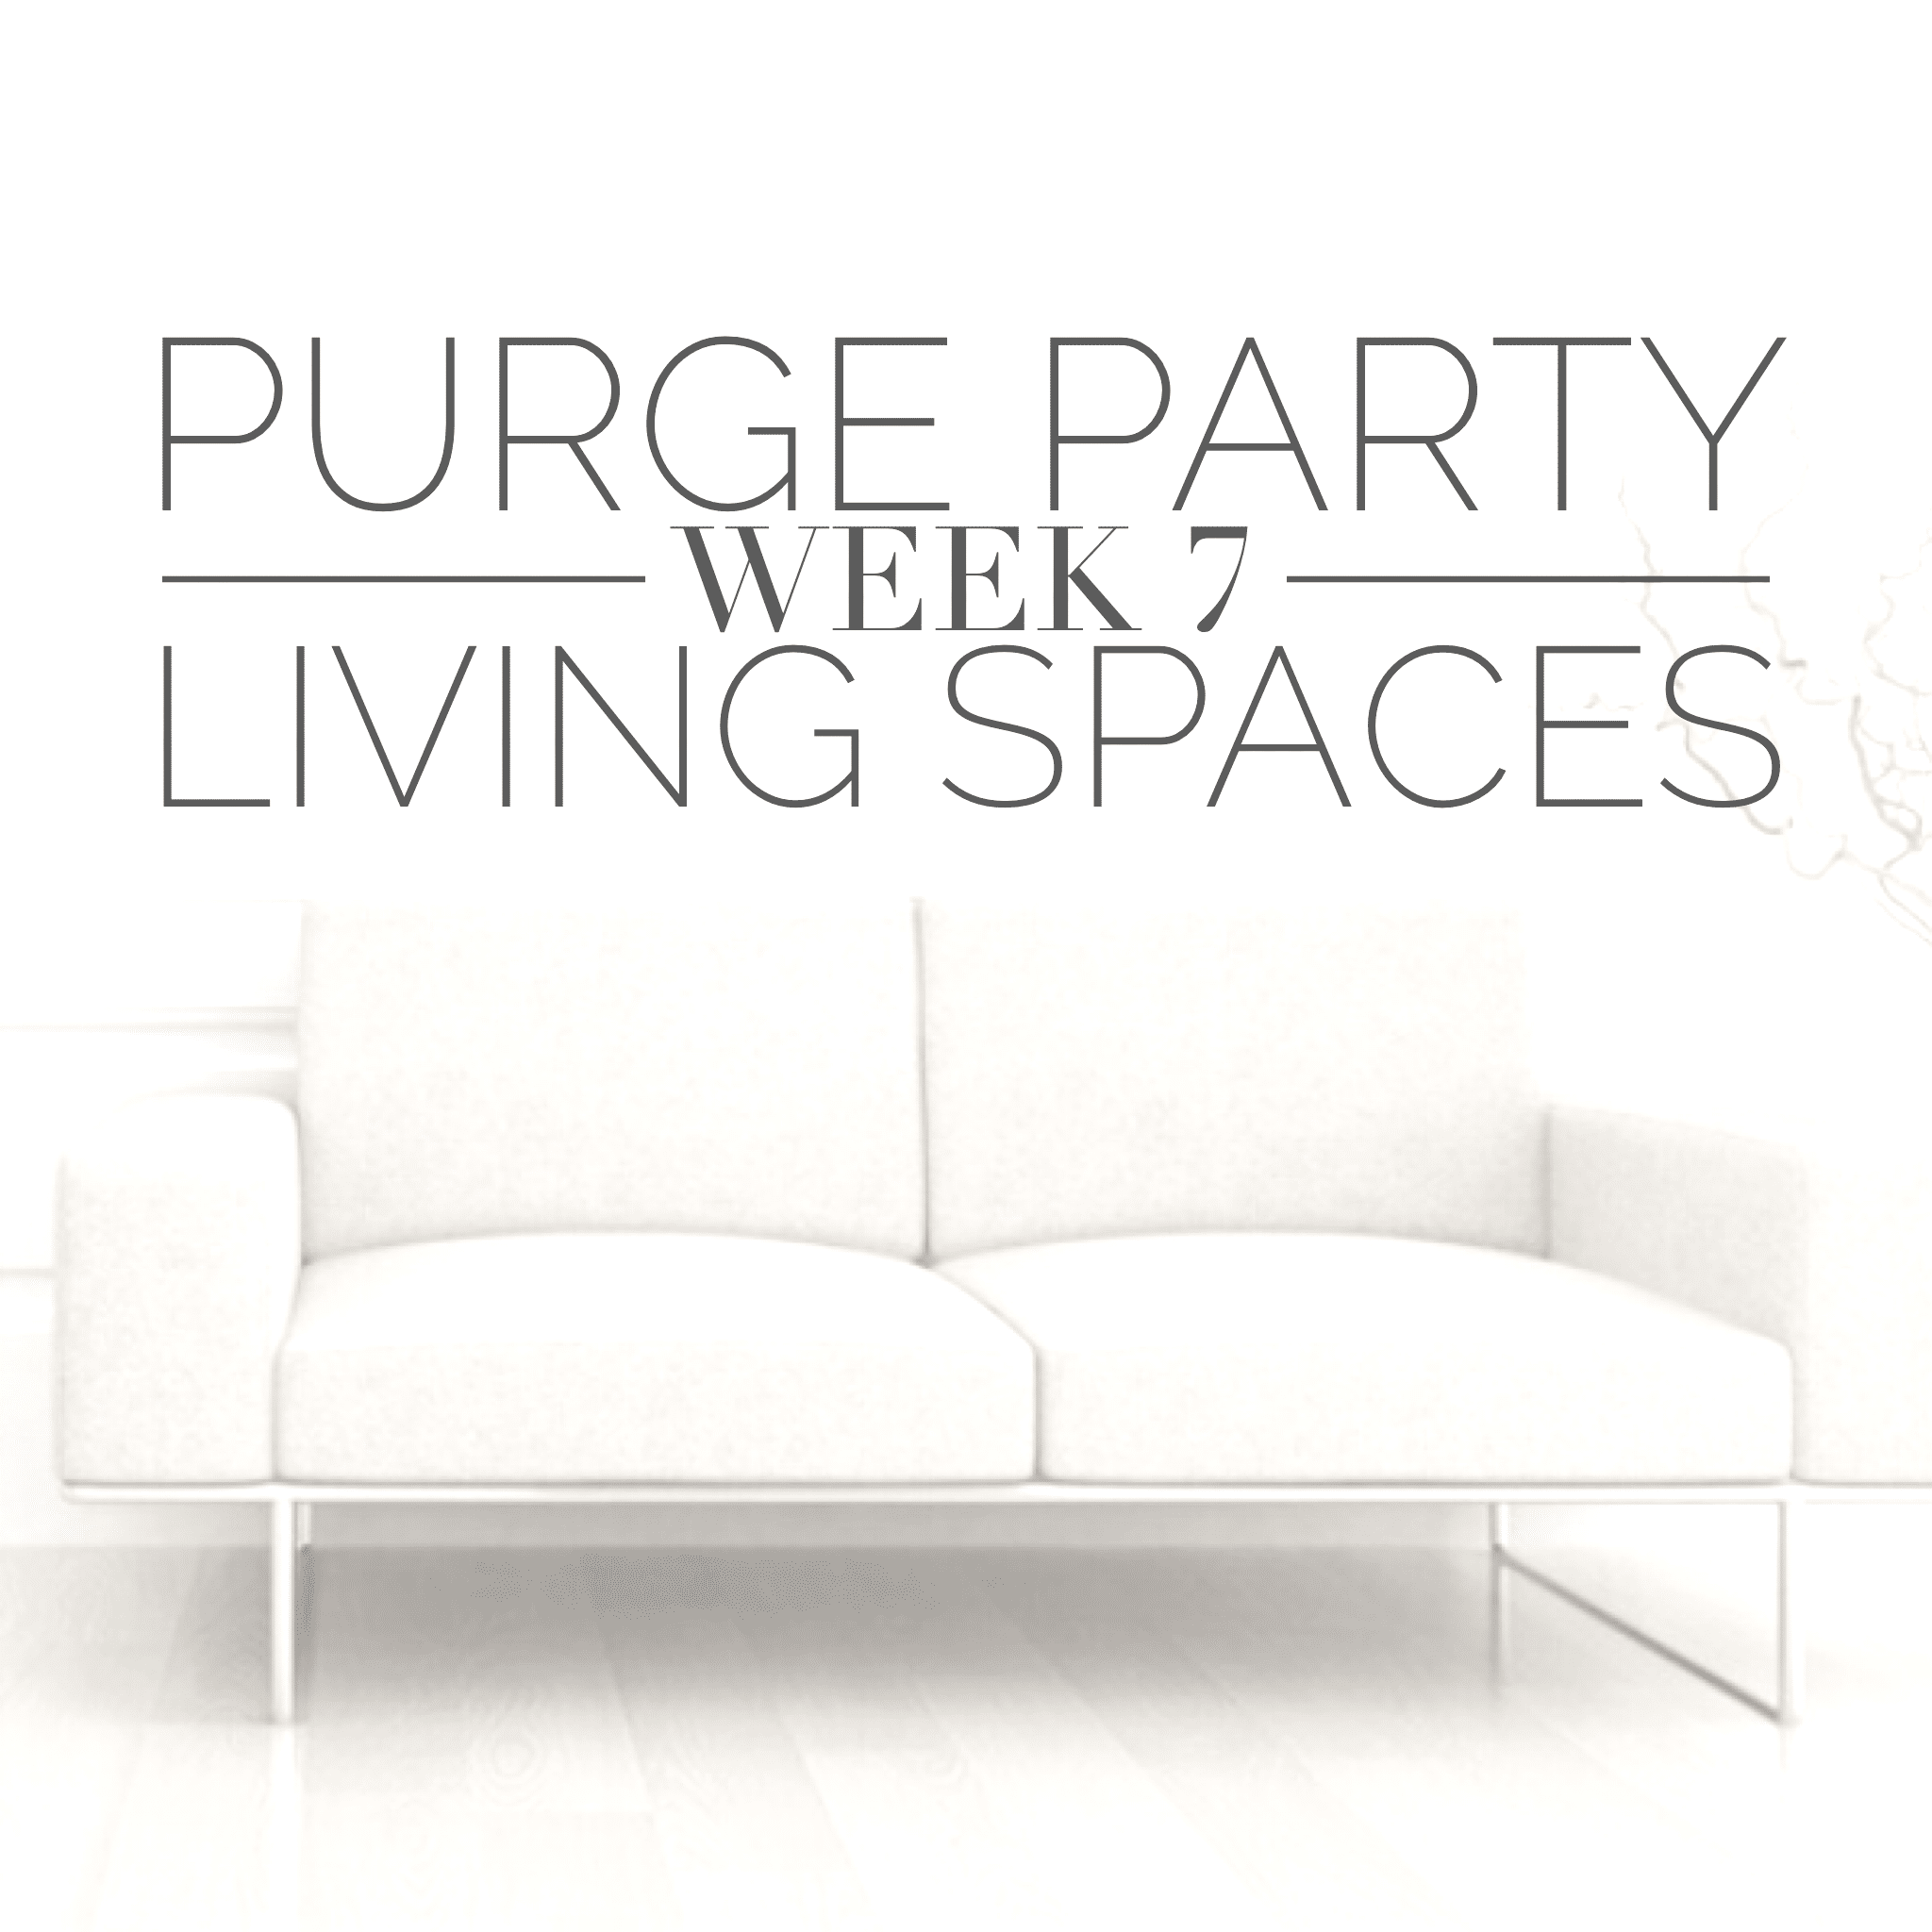 Purge Party Organization in the living spaces of your home